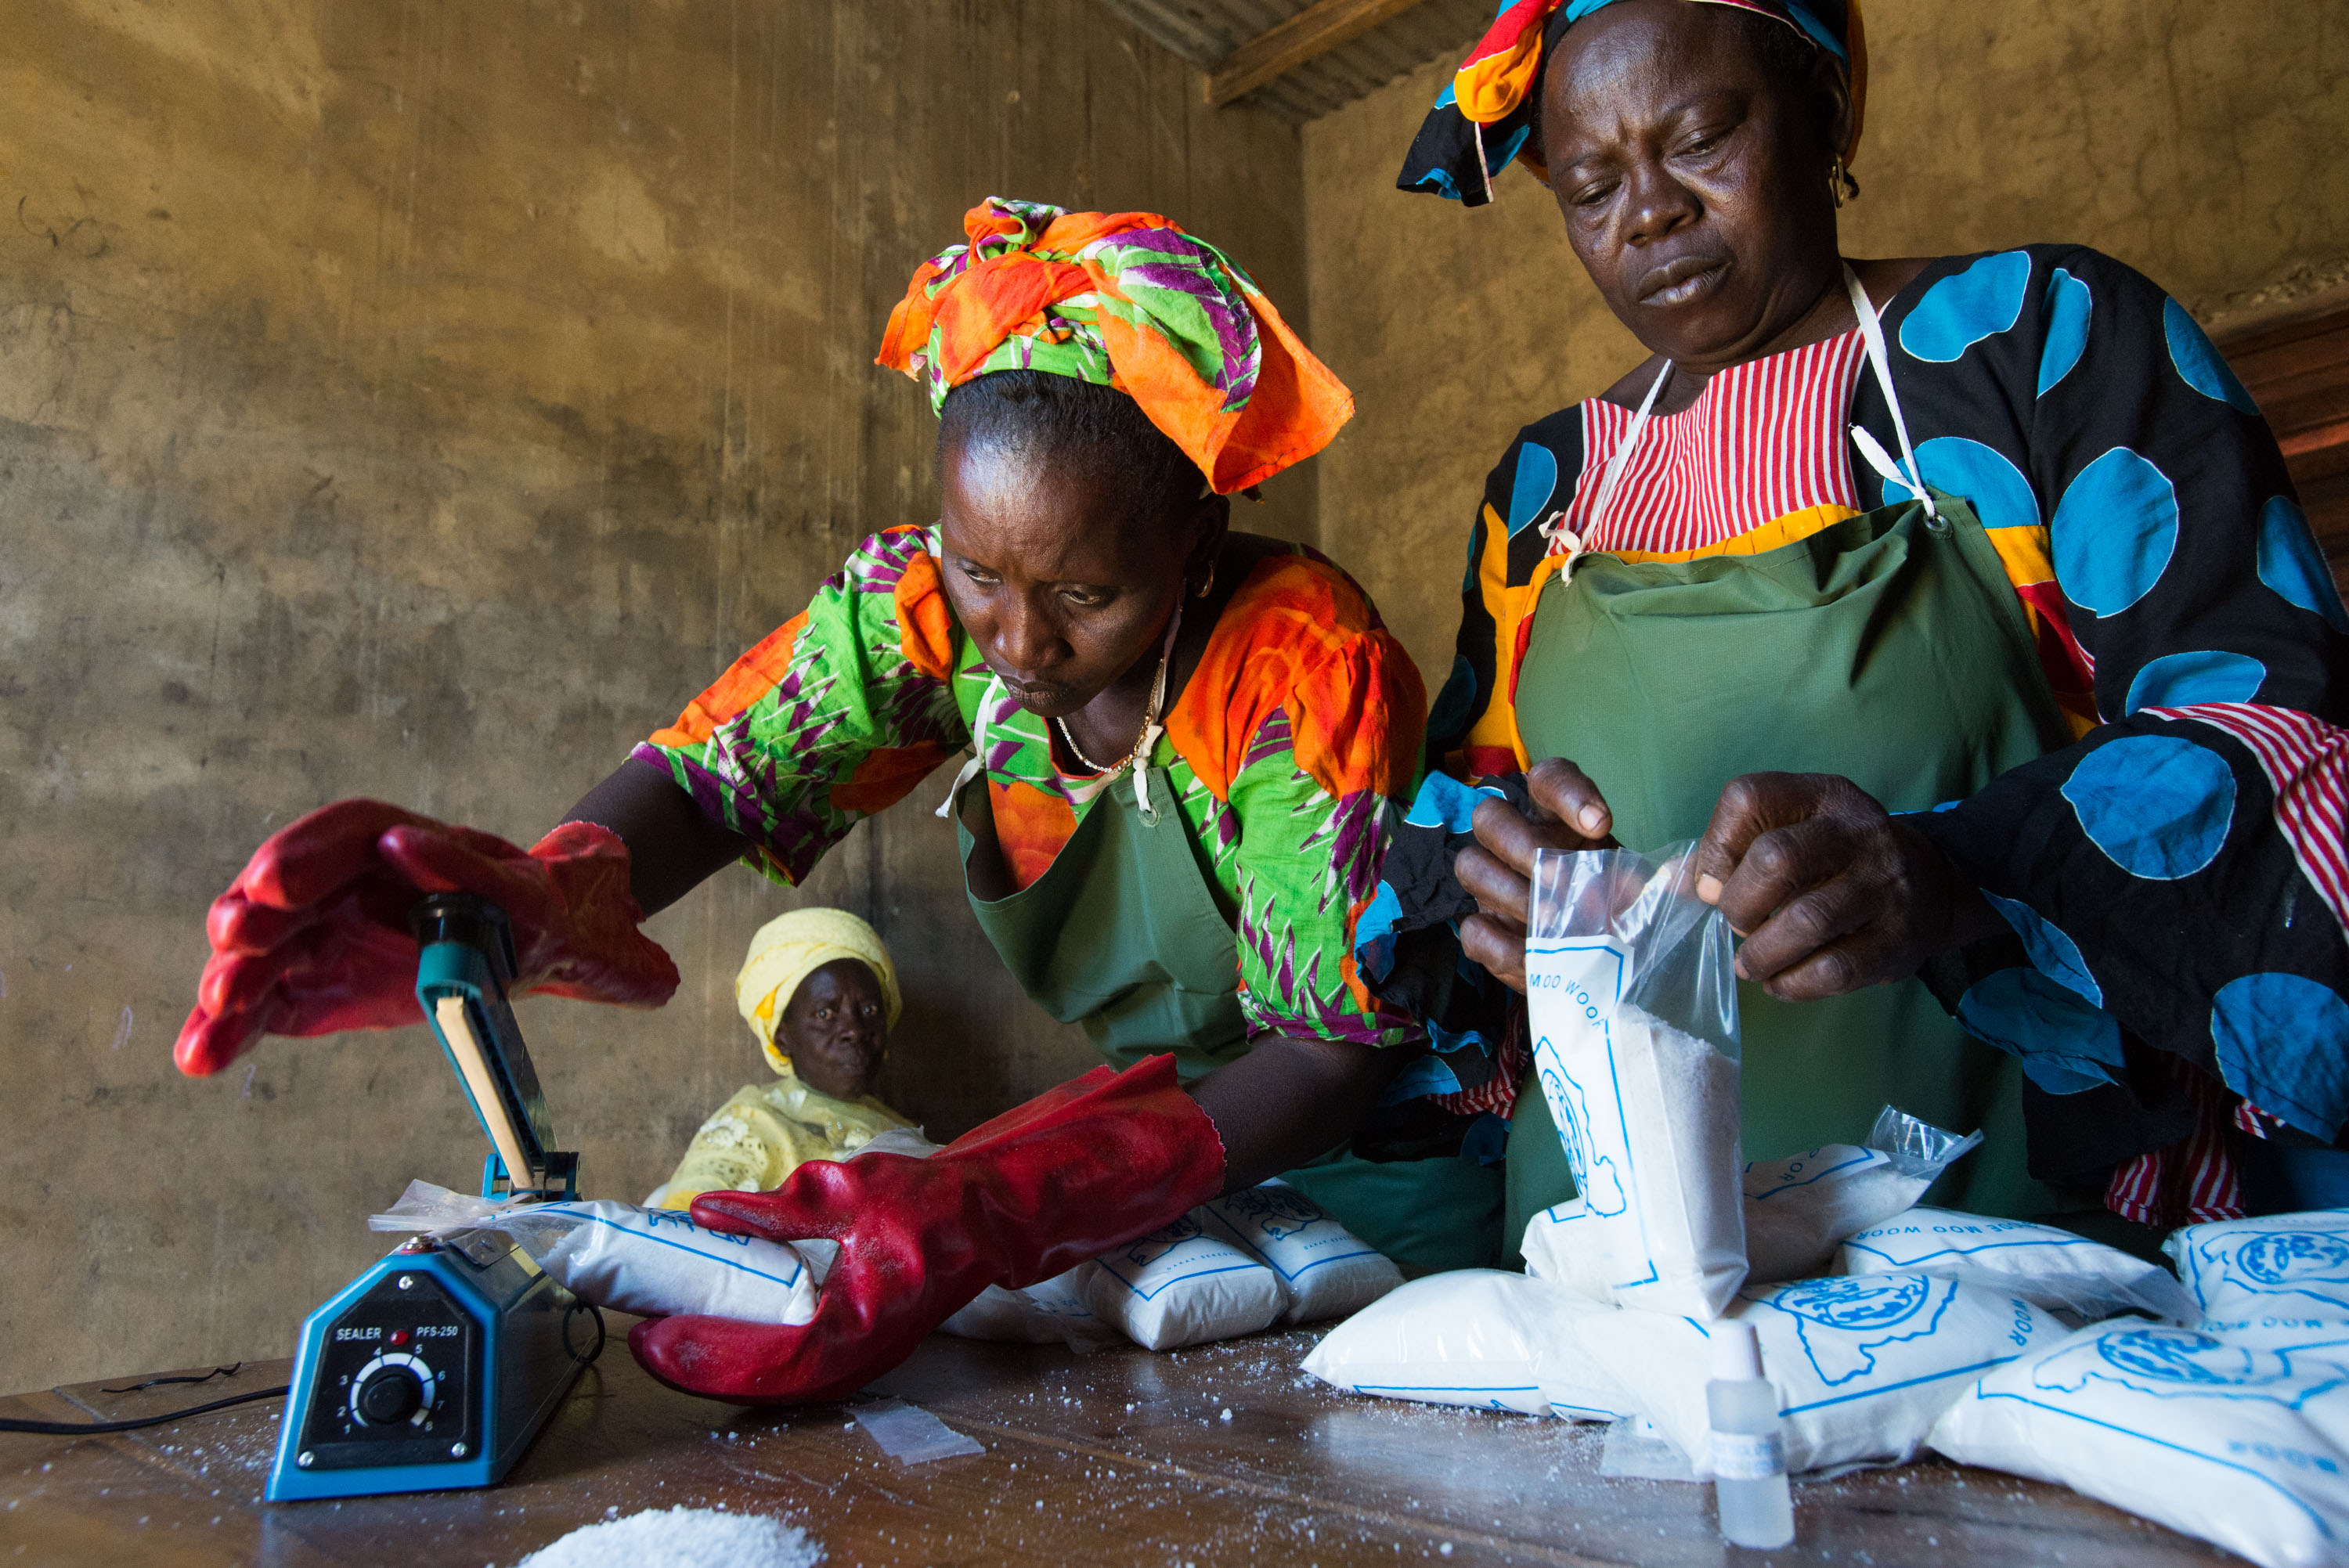 Ndeye Faye, top left, and Seynabou Diouf, right, test salt for iodine content before sealing it in plastic bags, while Fatou Sarr, bottom left, looks on. Marie Diouf employs the women in her micro-business producing and packaging iodized salt.